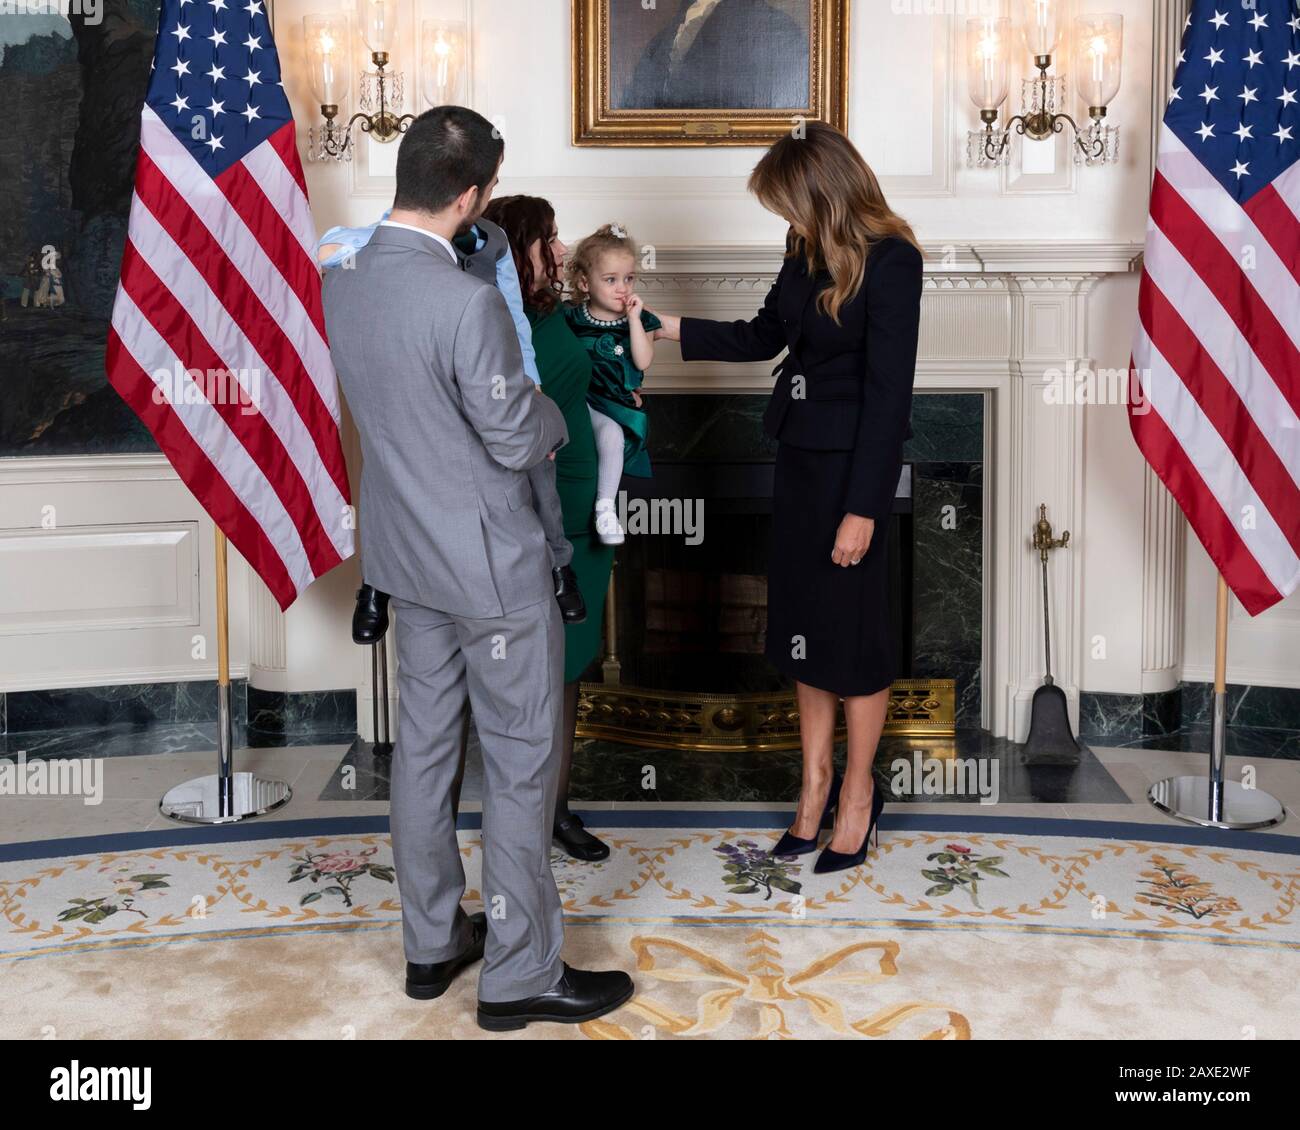 U.S First Lady Melania Trump poses with Robin Schneider, her daughter Ellie Schneider and her husband during a reception for State of the Union gallery guests in the Diplomatic Reception Room of the White House February 4, 2020 in Washington, DC. Stock Photo